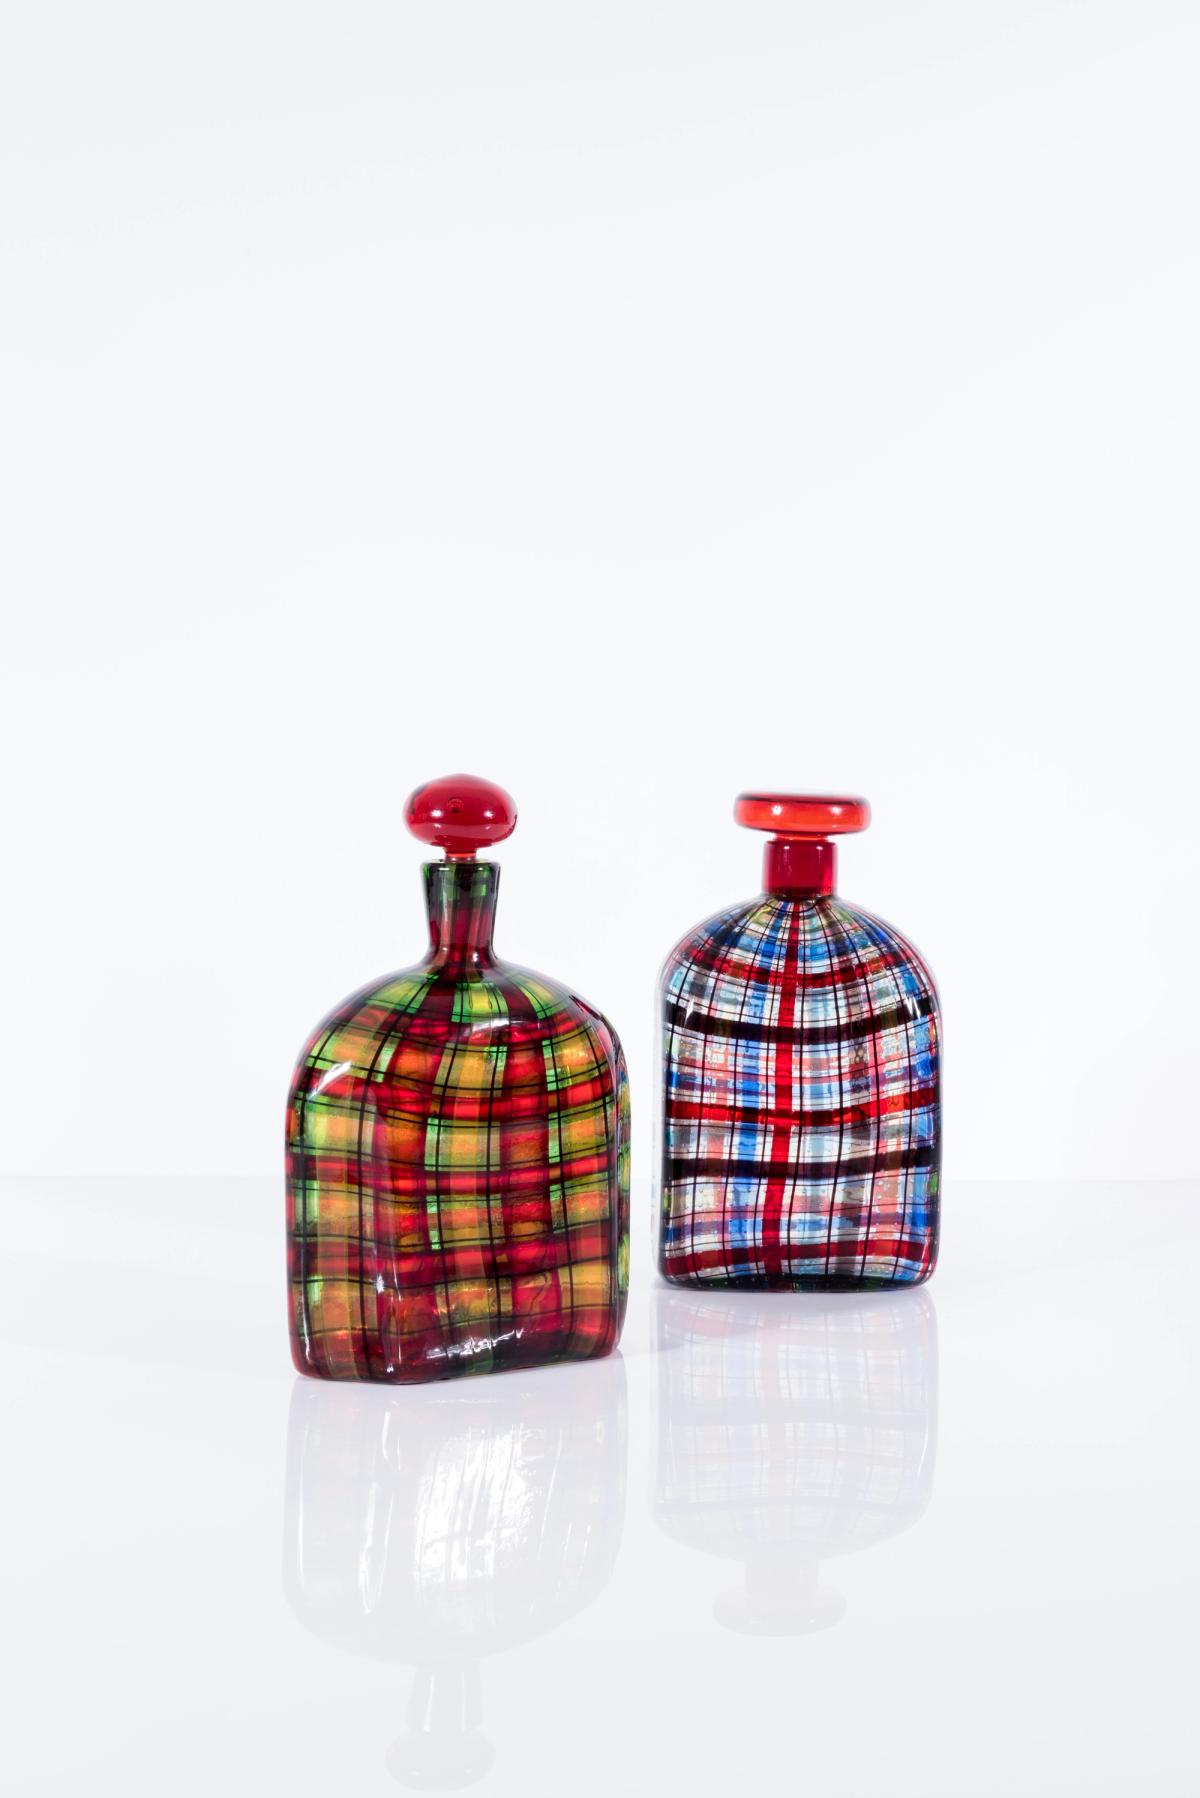 Two tartan decanters by Ercole Barovier, 1969 Piasa